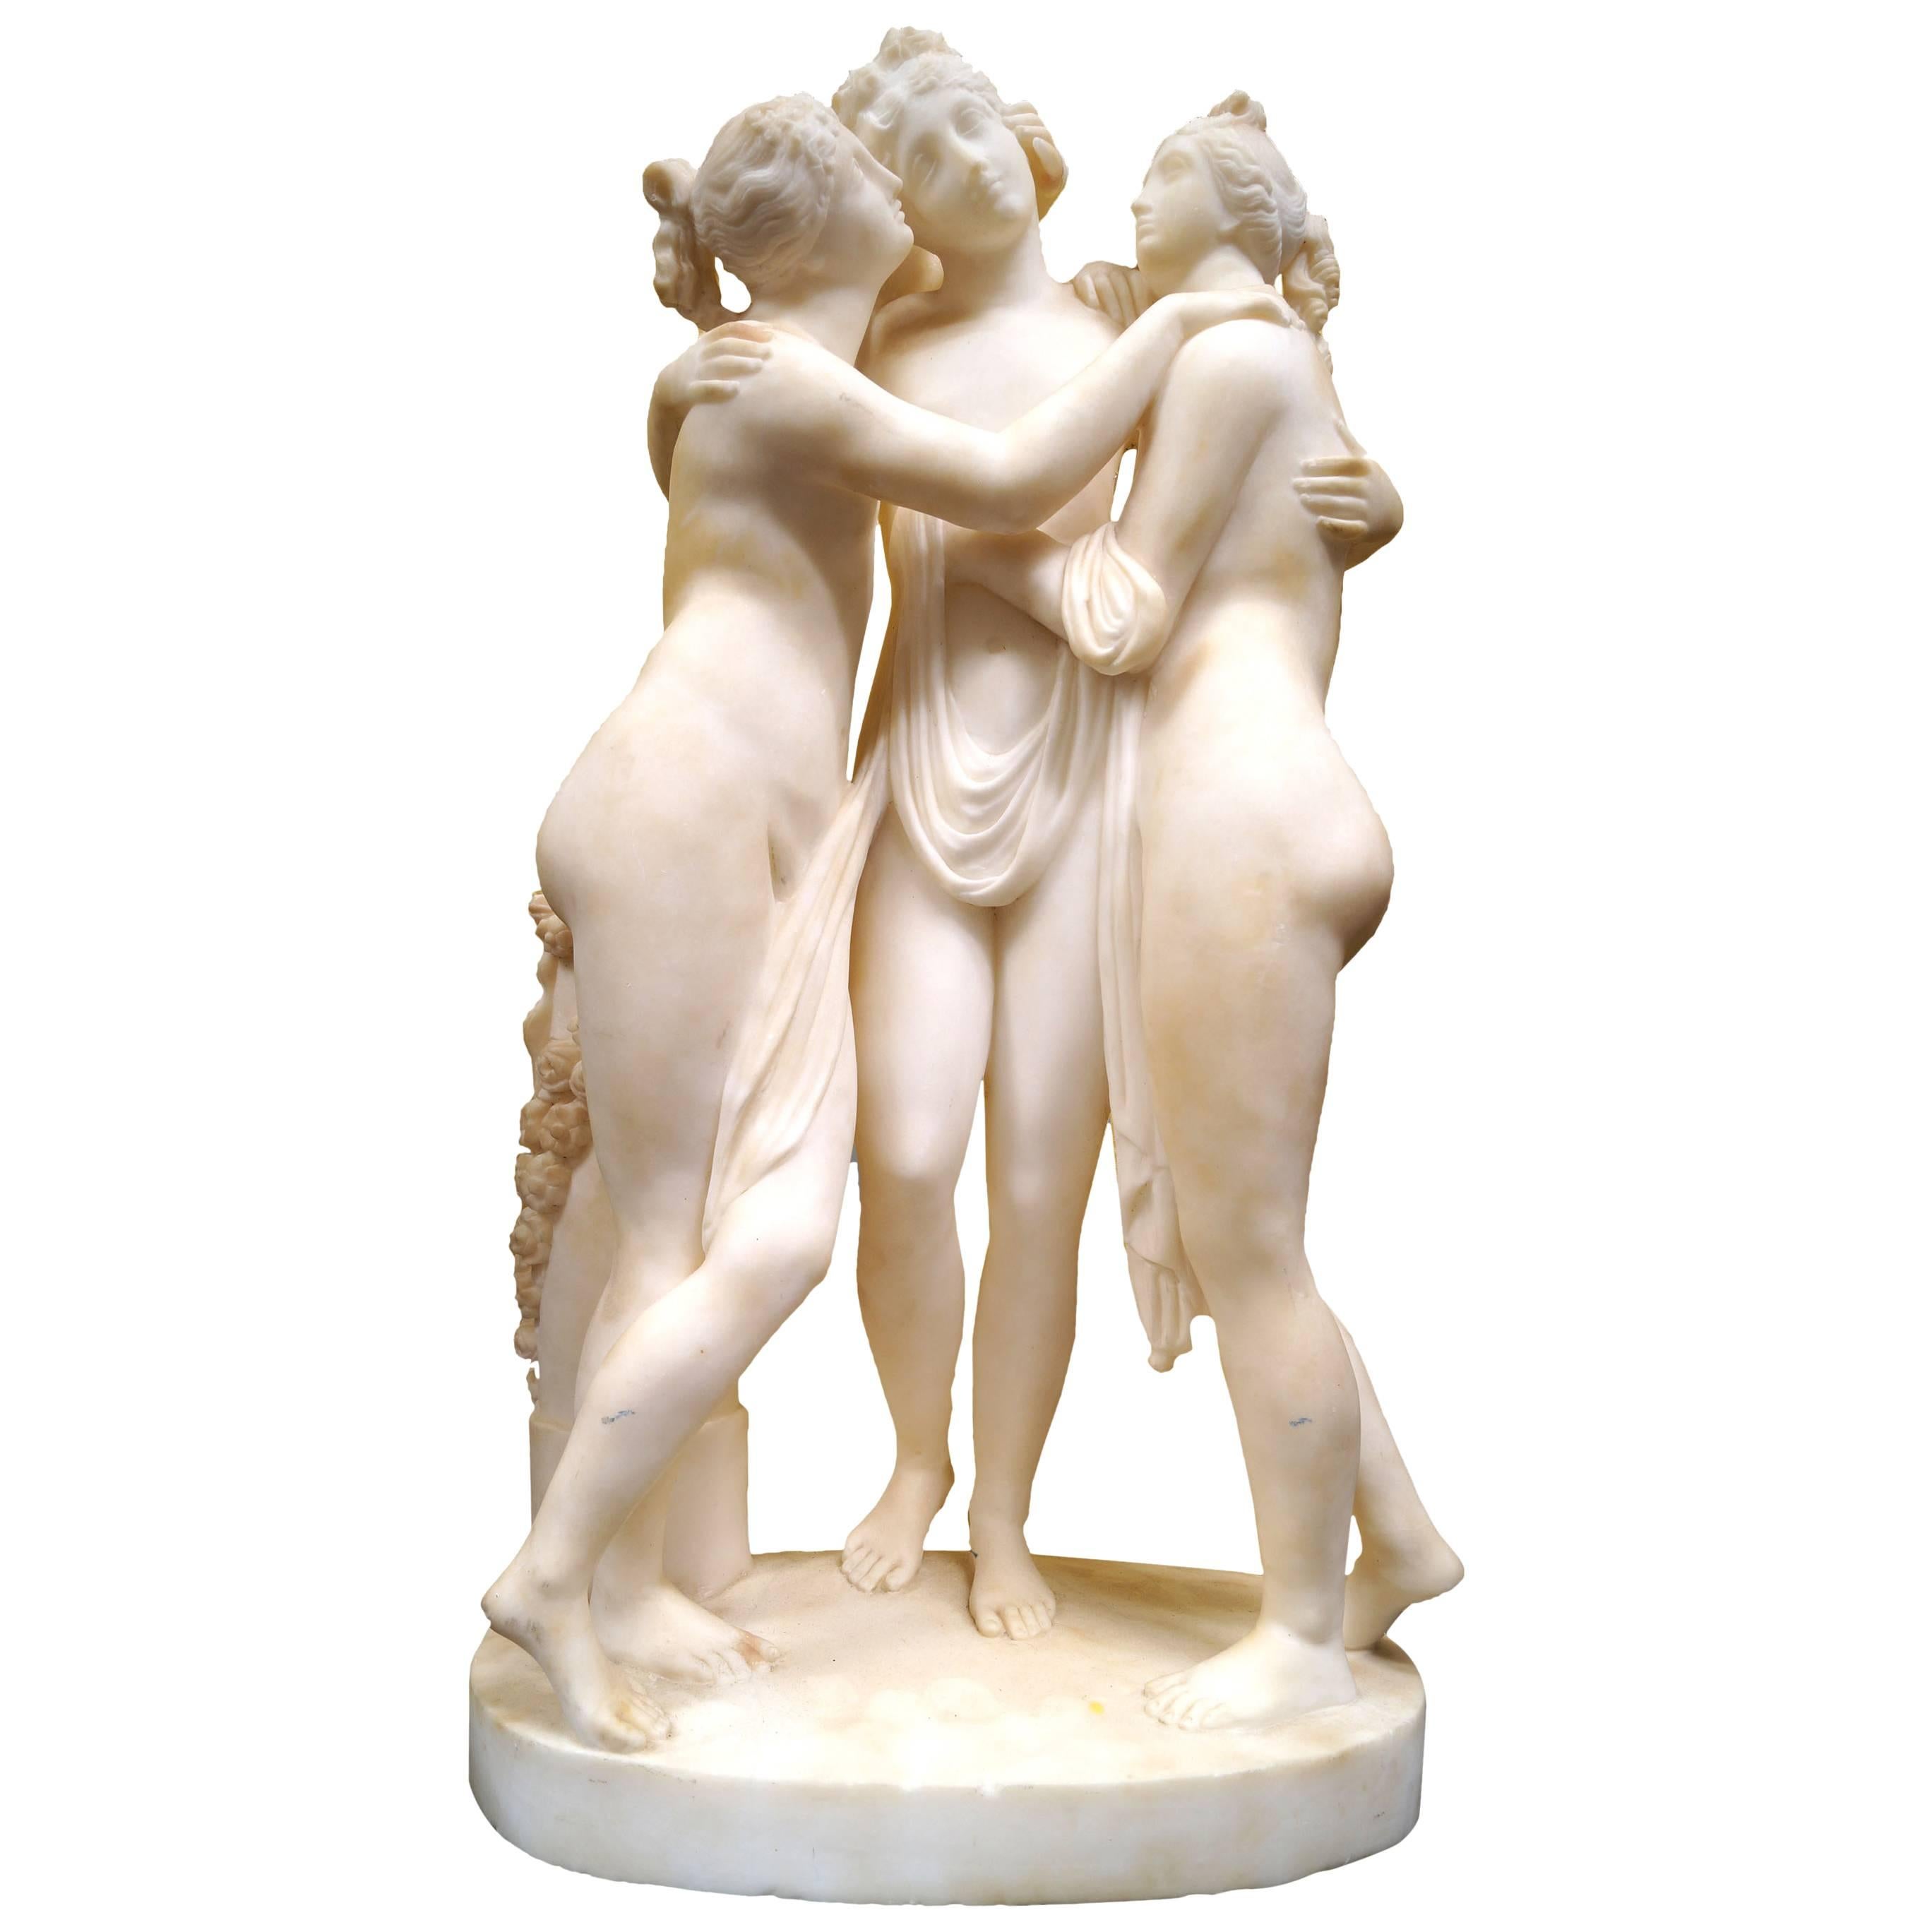 Carved Italian Alabaster Group of the Three Graces